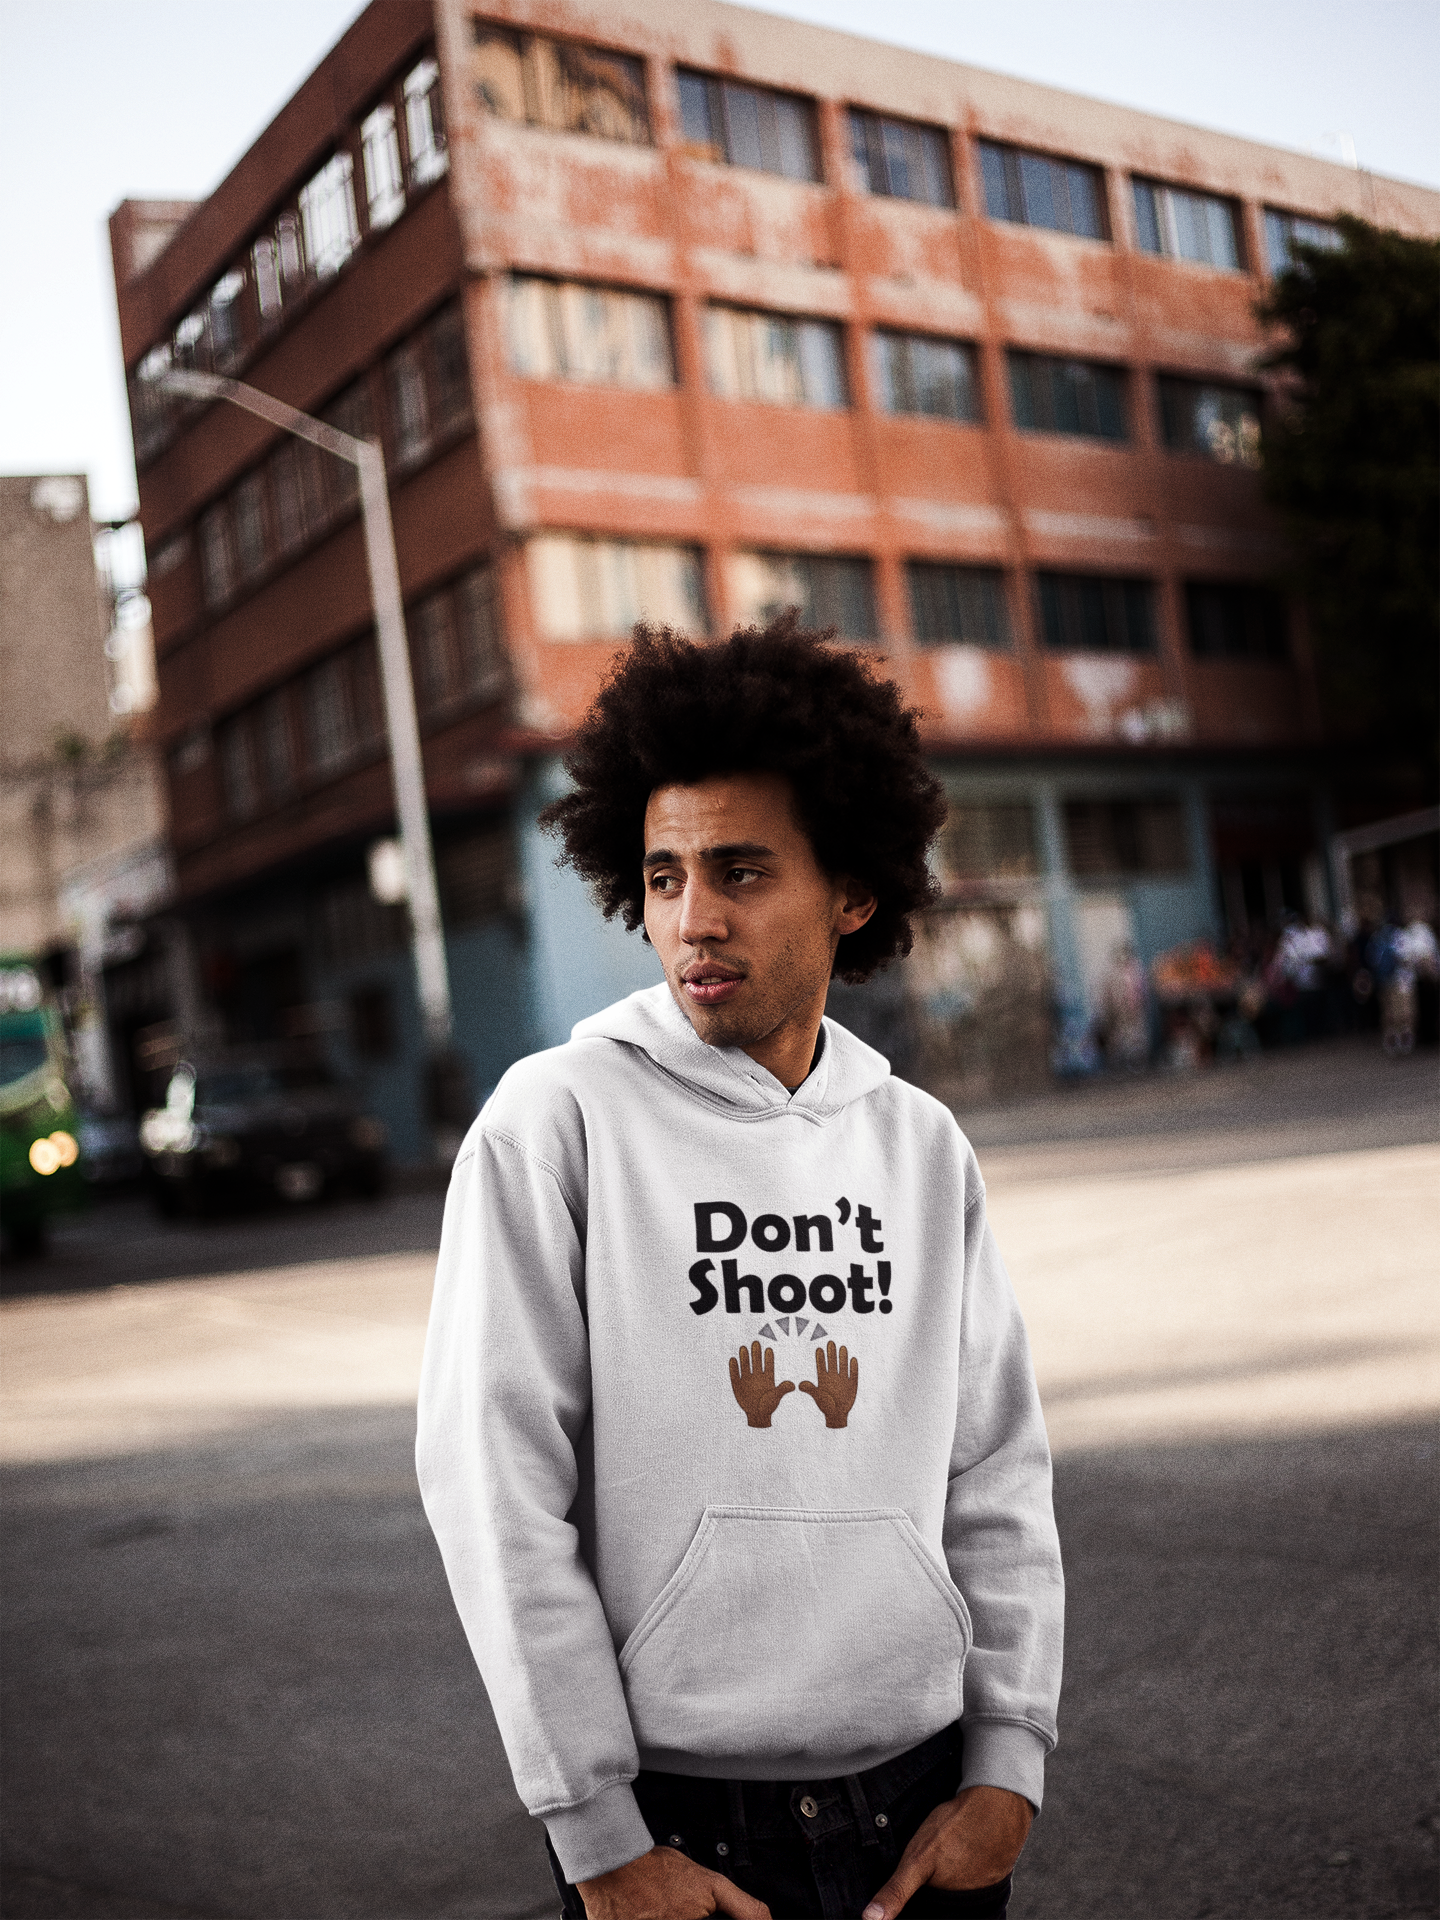 "Don't Shoot" Unisex Hoodie (Available in White)